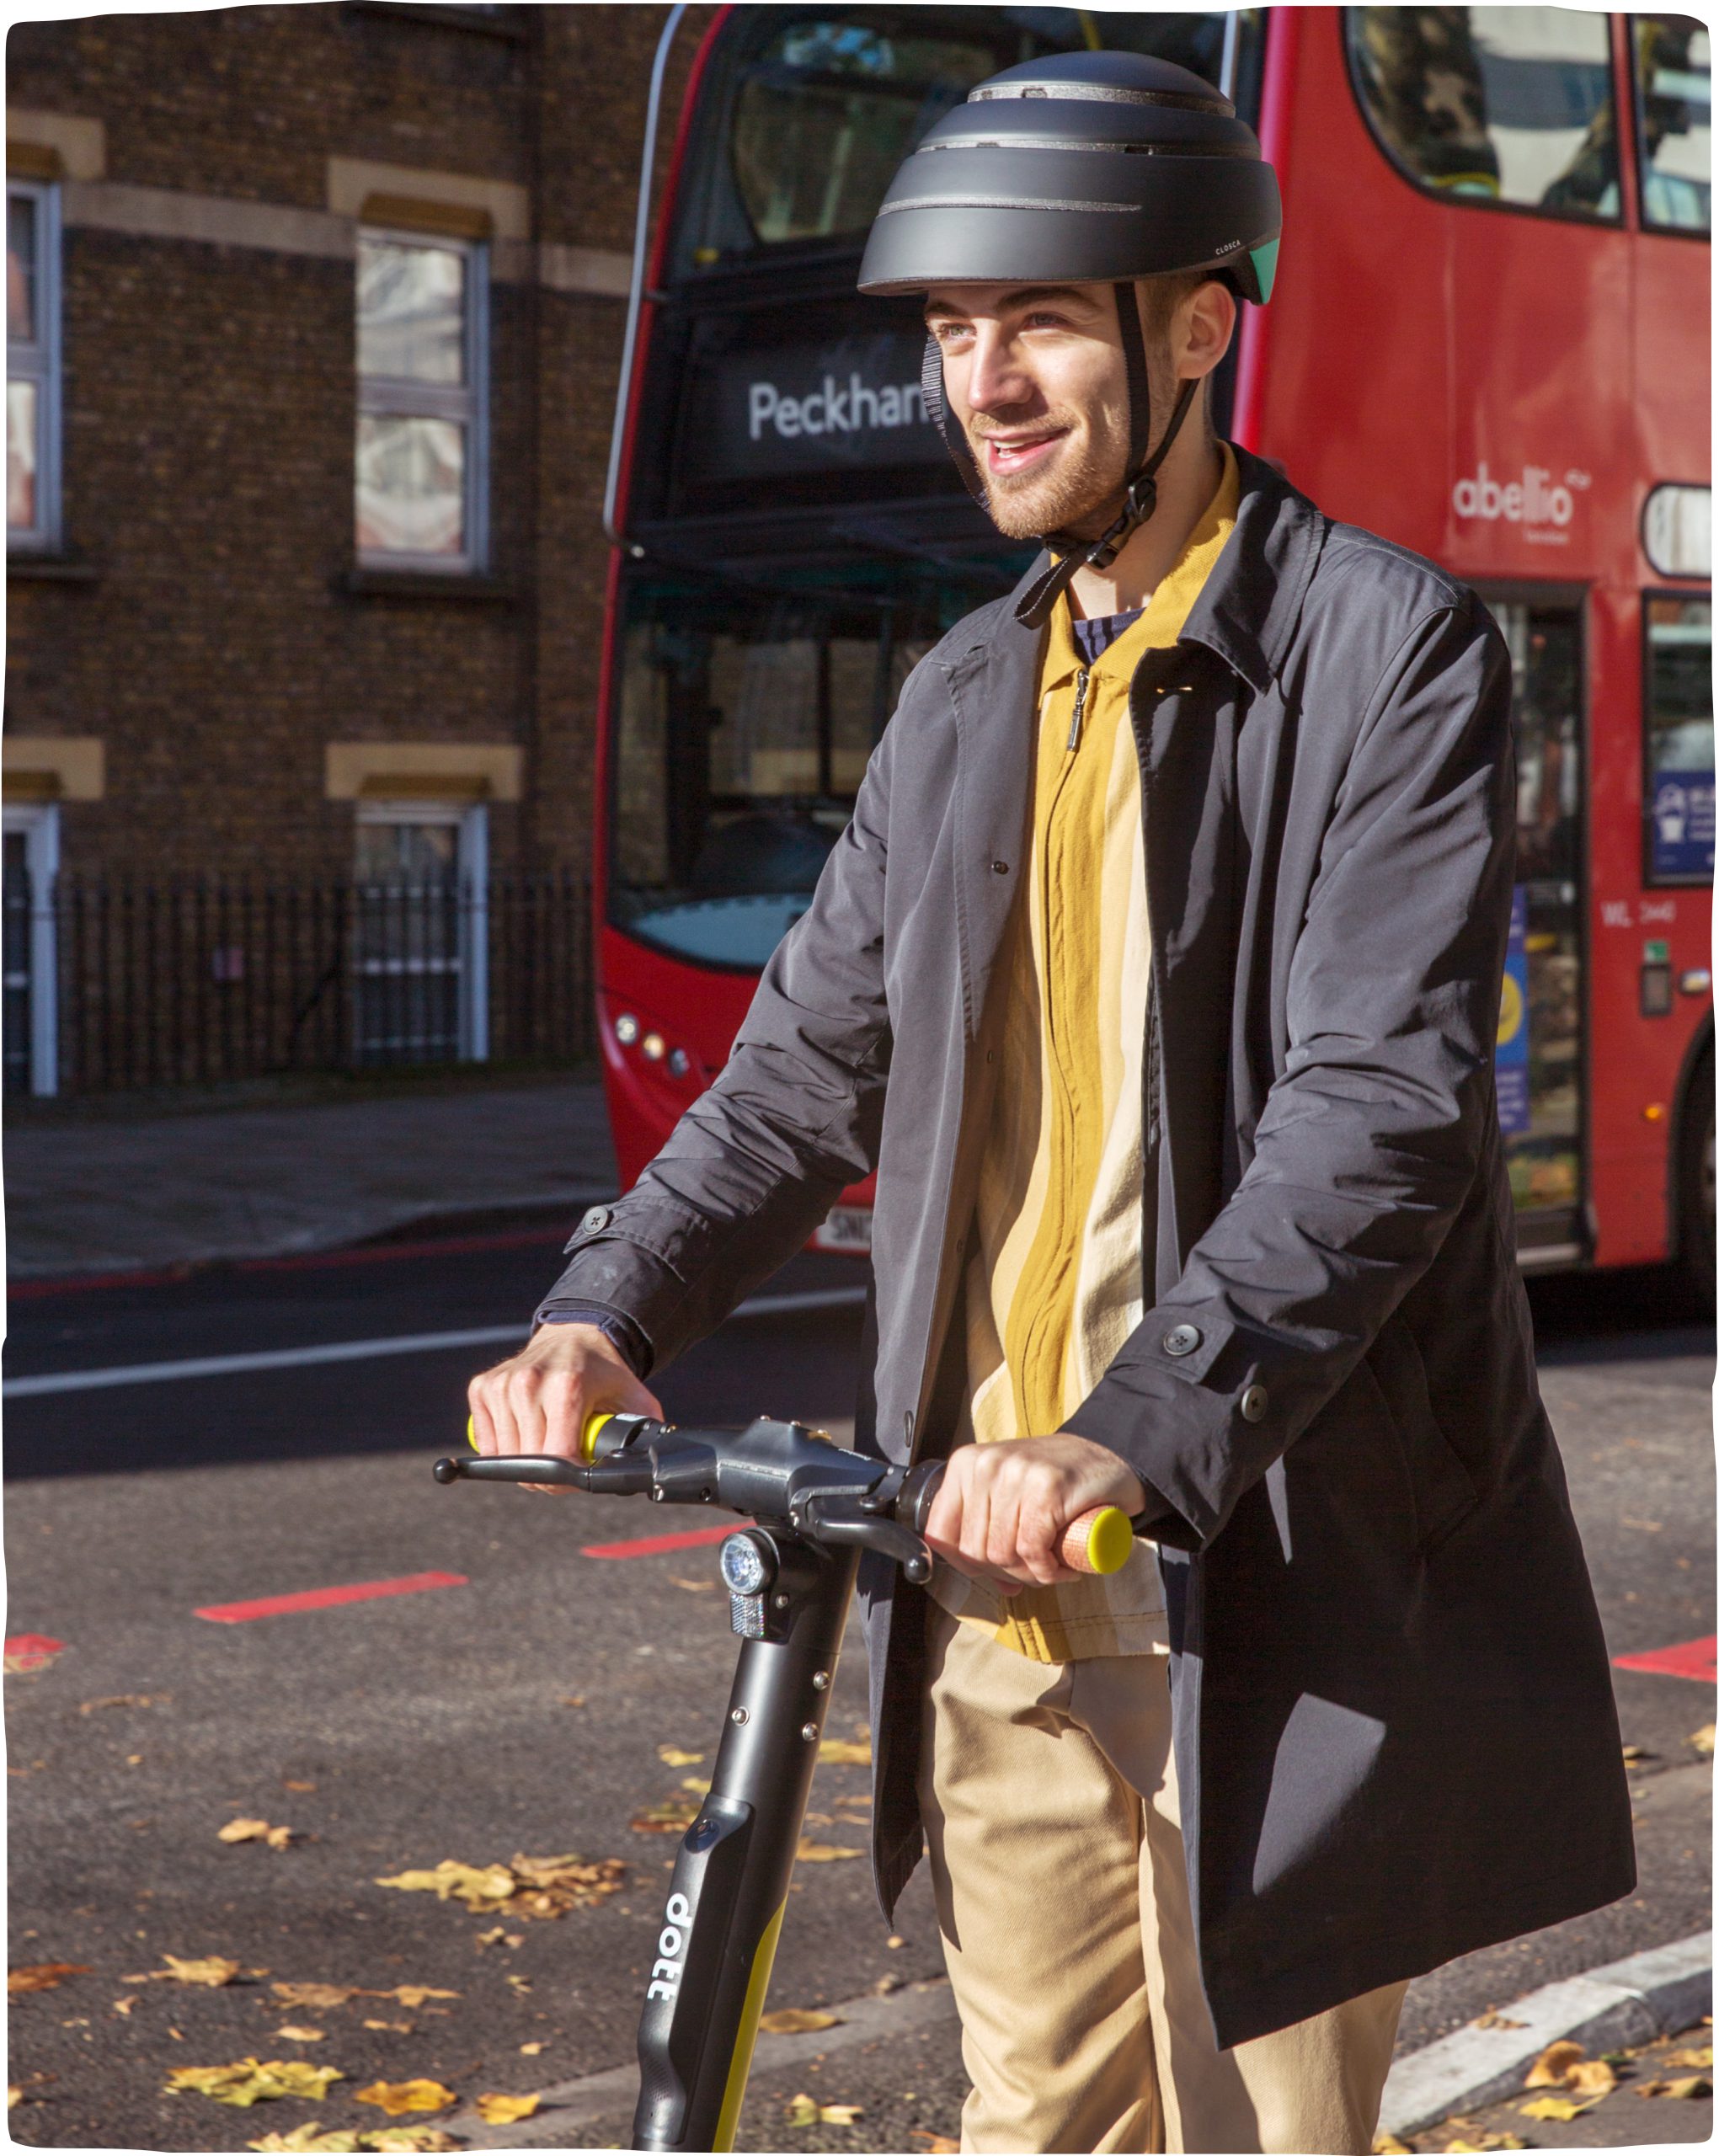 A man wearing a helmet and riding an e-scooter down a London street with a red double-decker bus in the background.